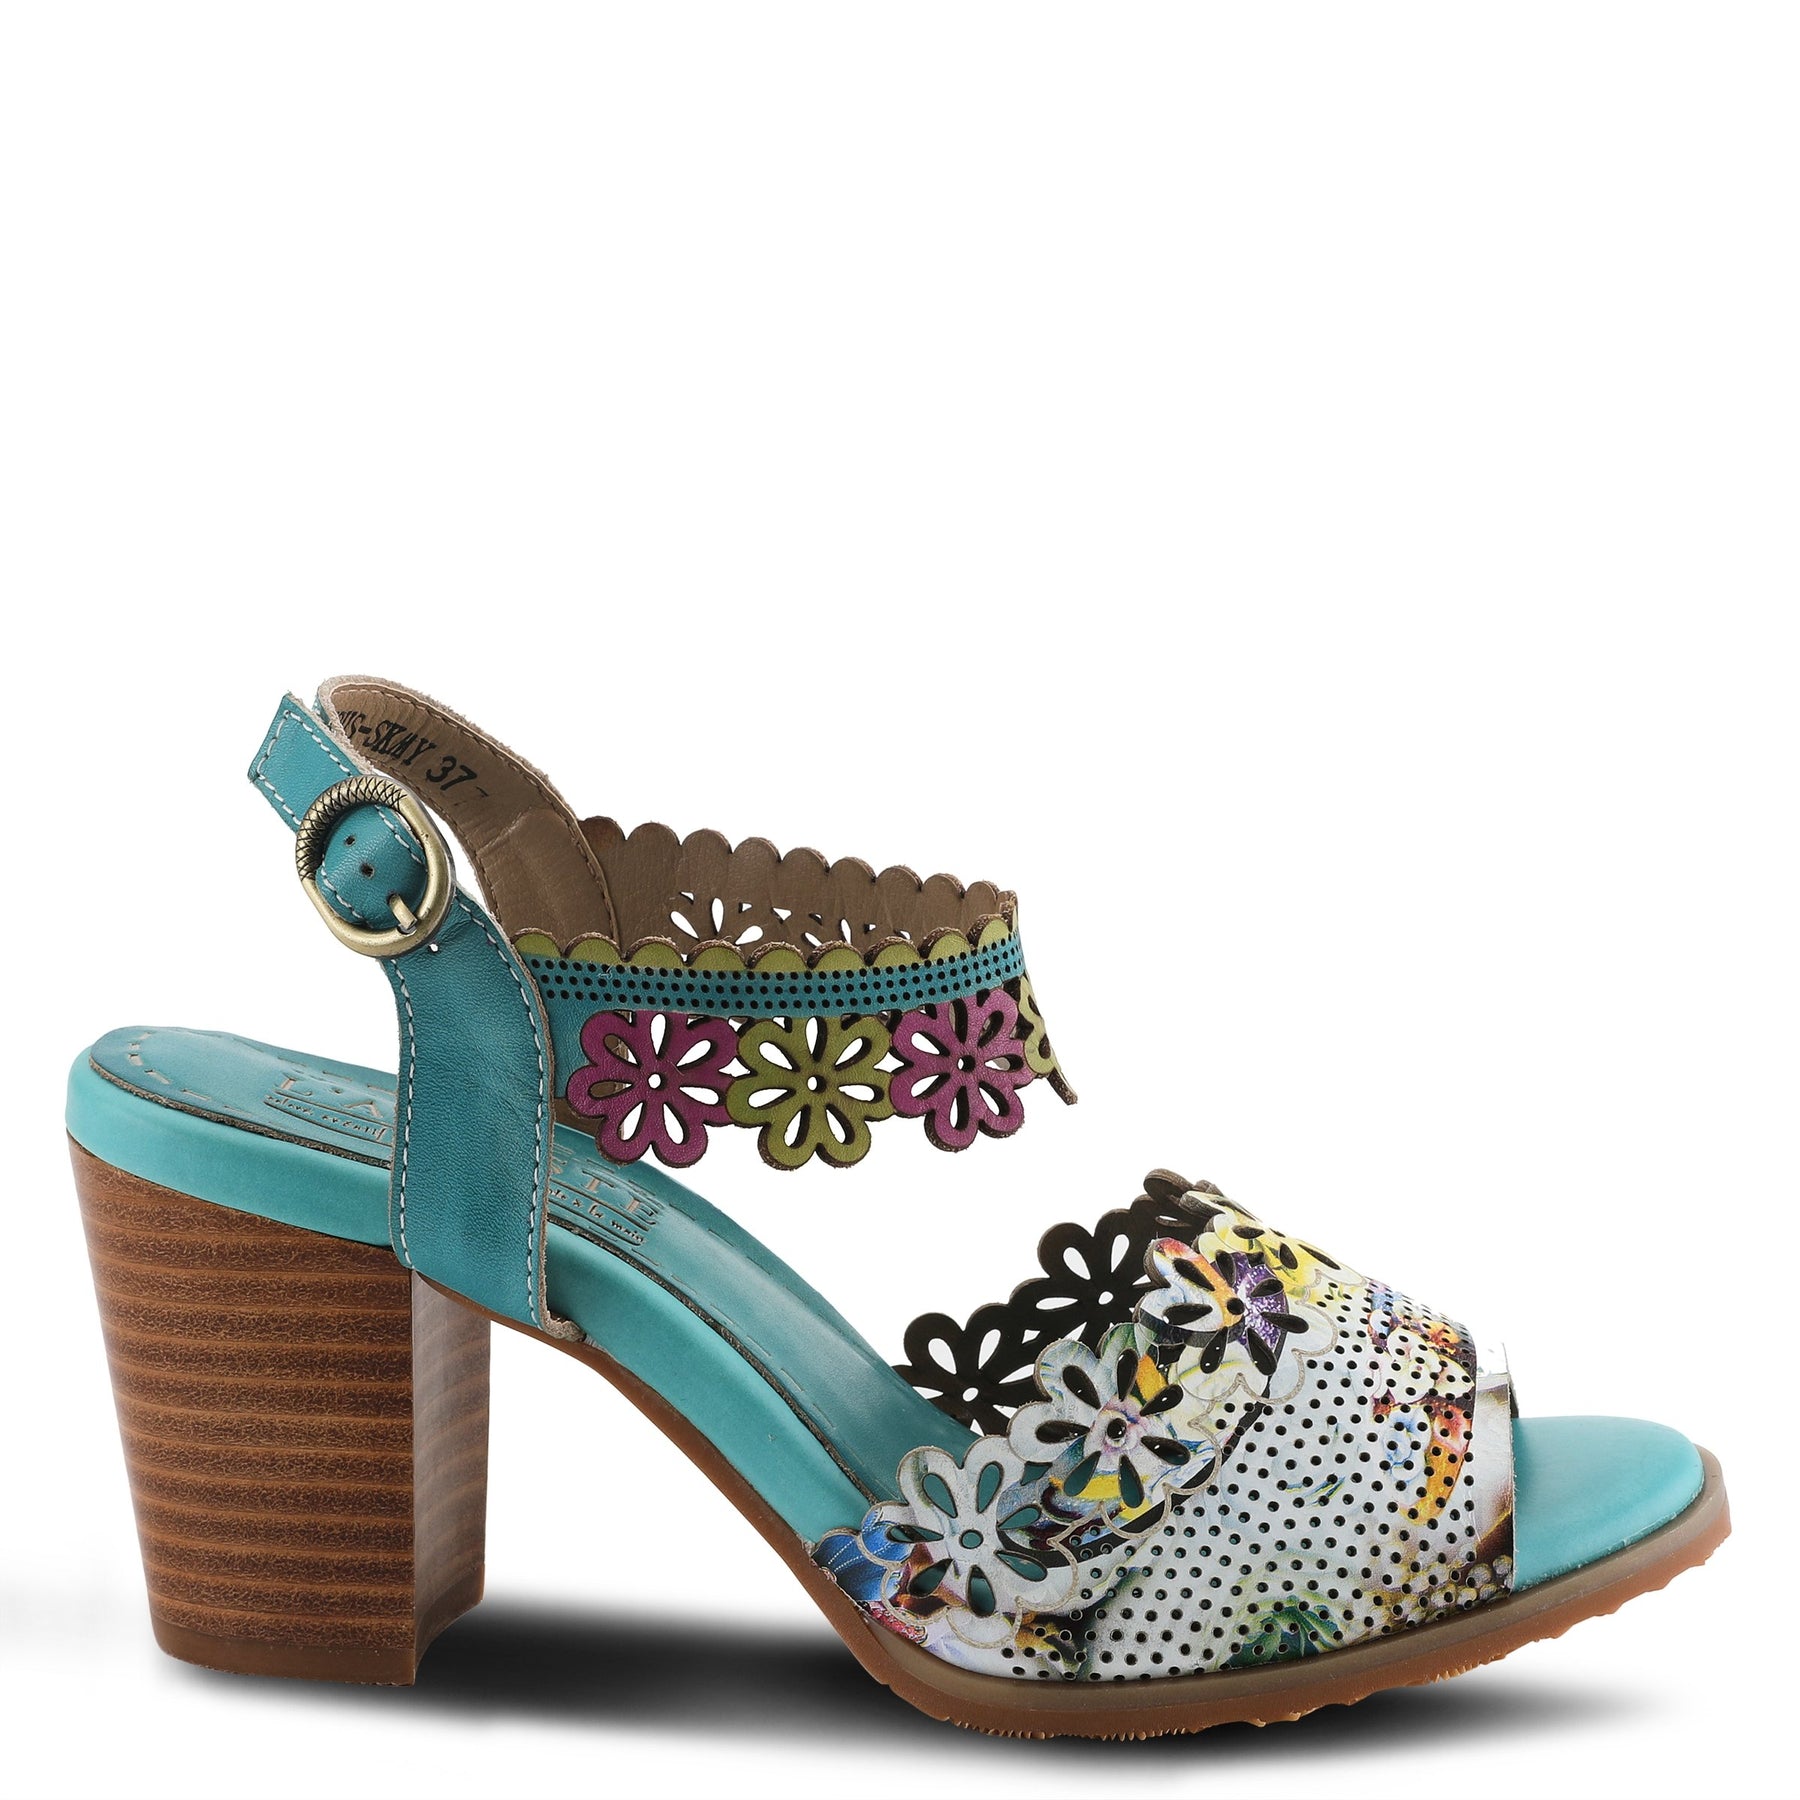 FLORADACIOUS ANKLE STRAP SANDAL by L'ARTISTE – Spring Step Shoes